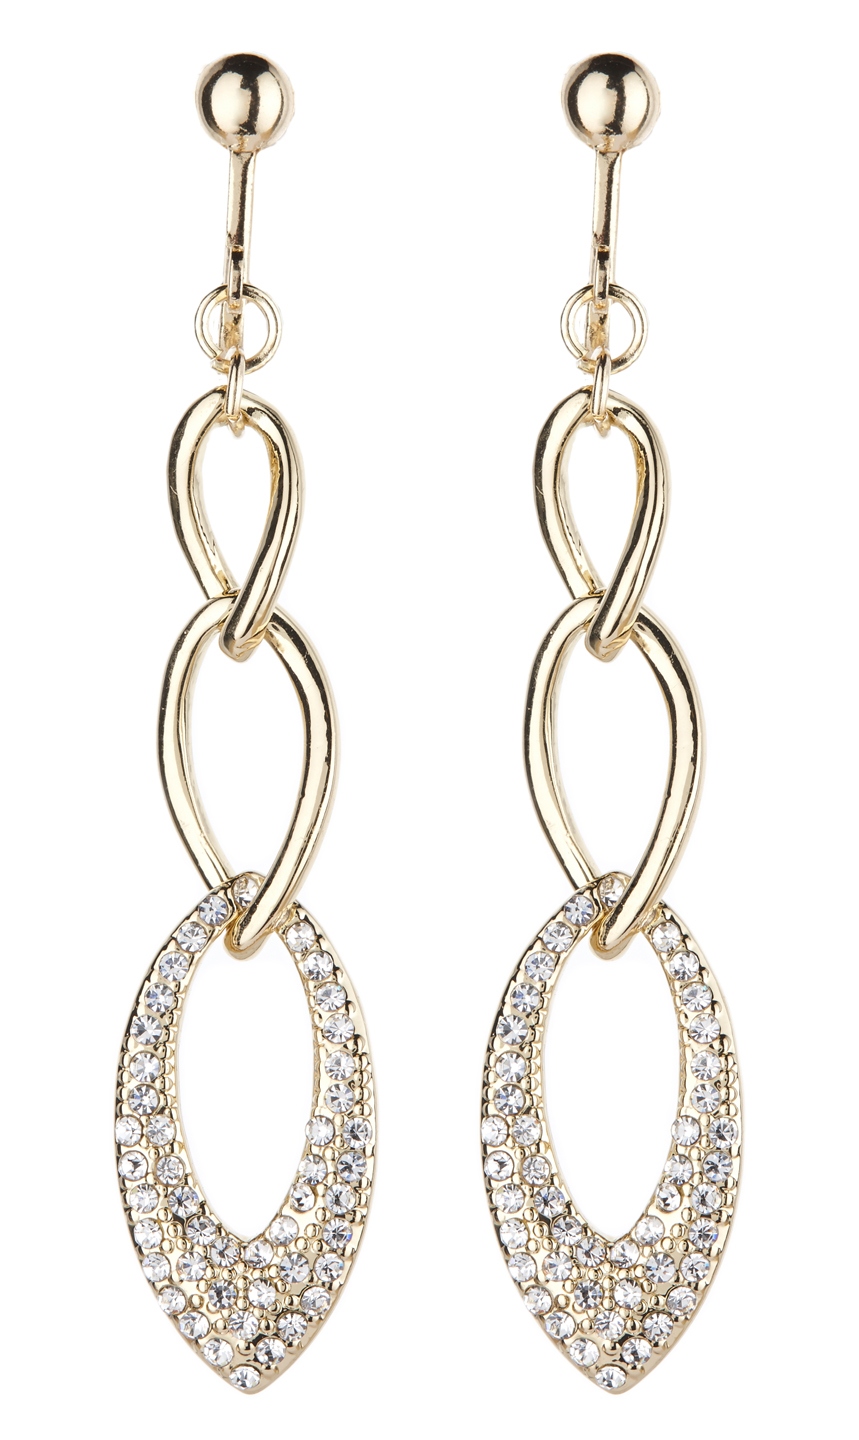 Clip On Earrings - Catlin G - gold drop earring with clear crystals